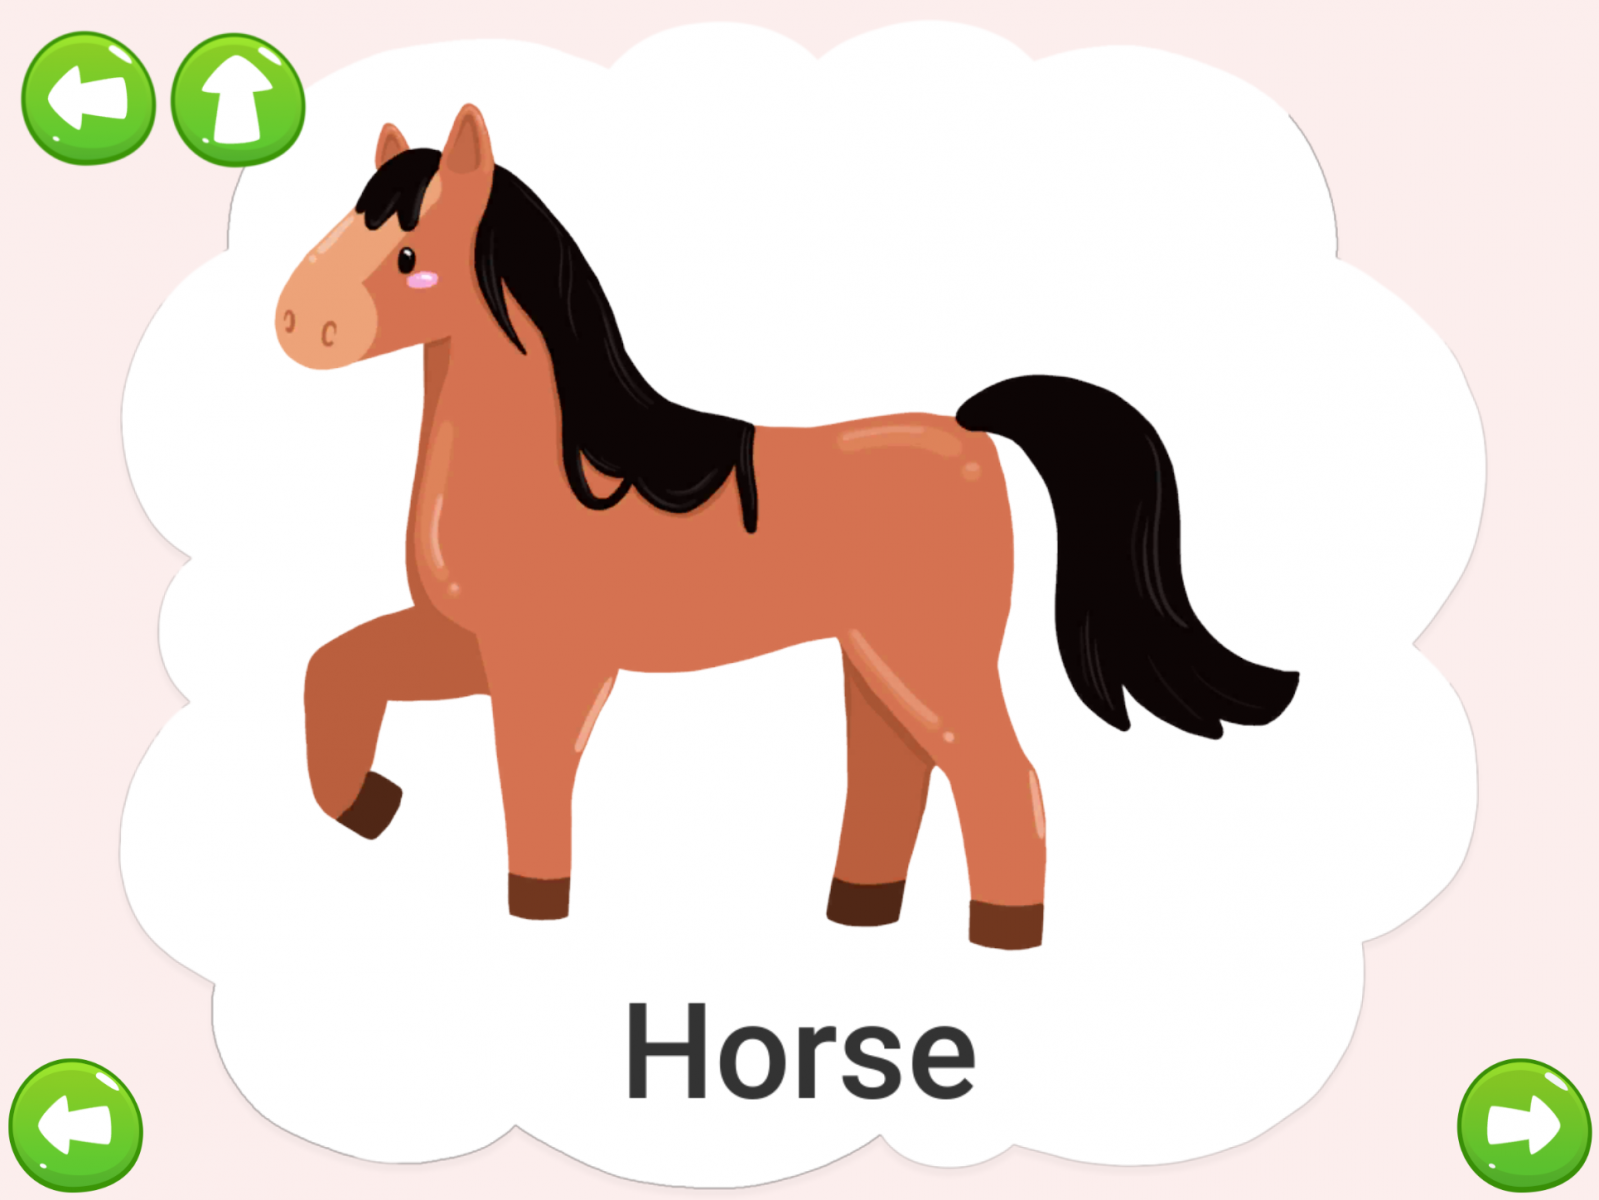 Online flashcards for babies with animal sounds and games | Amax Kids